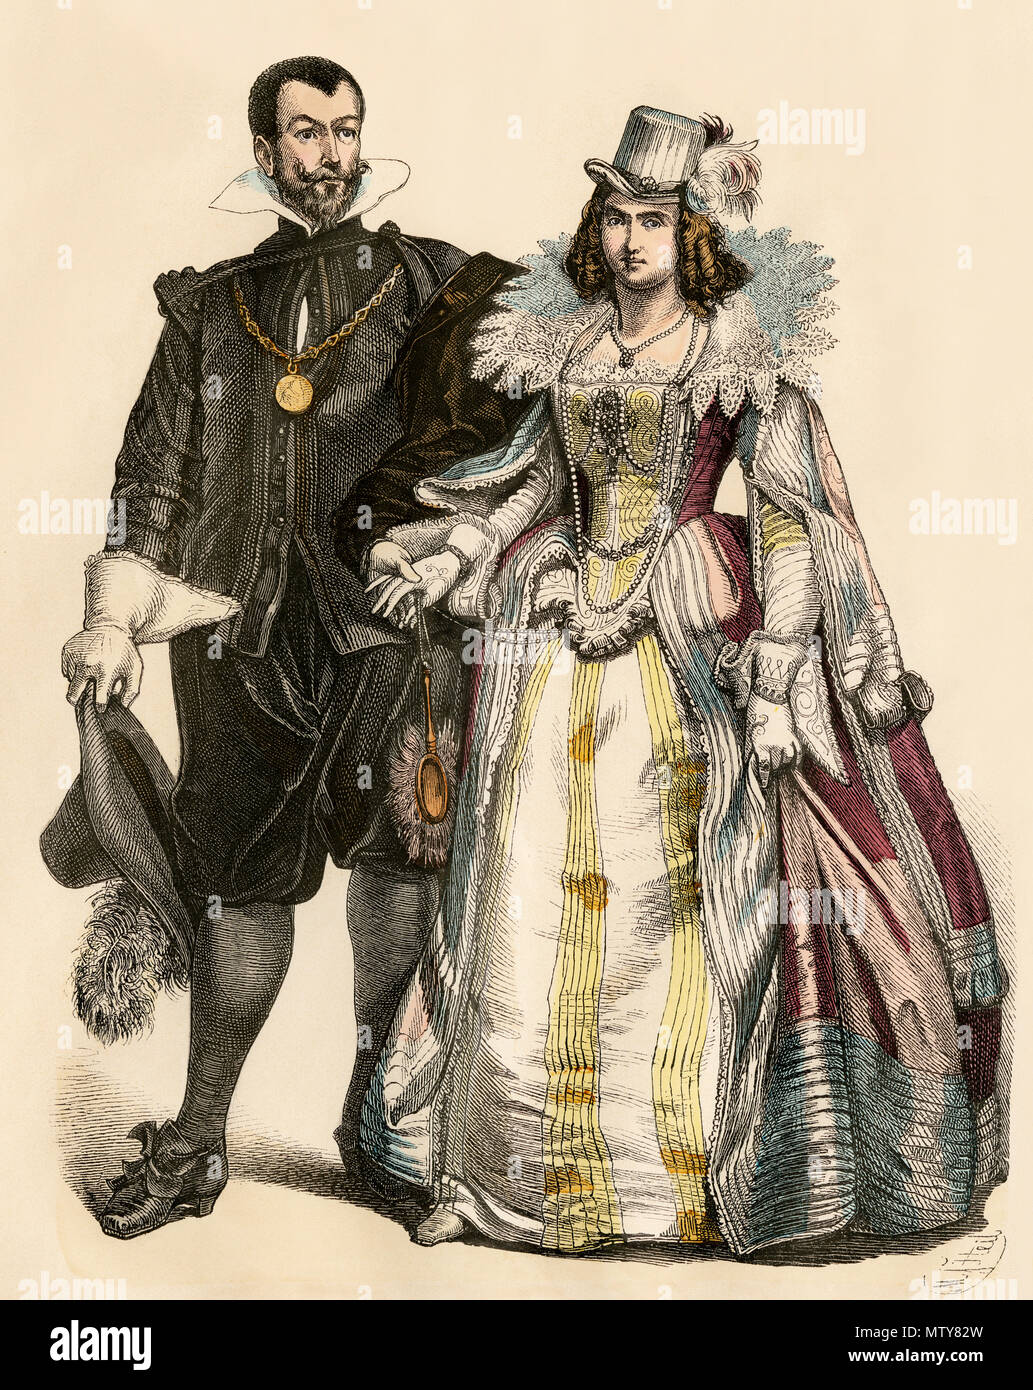 Spanish nobility in the Netherlands, 1600s. Hand-colored print Stock Photo